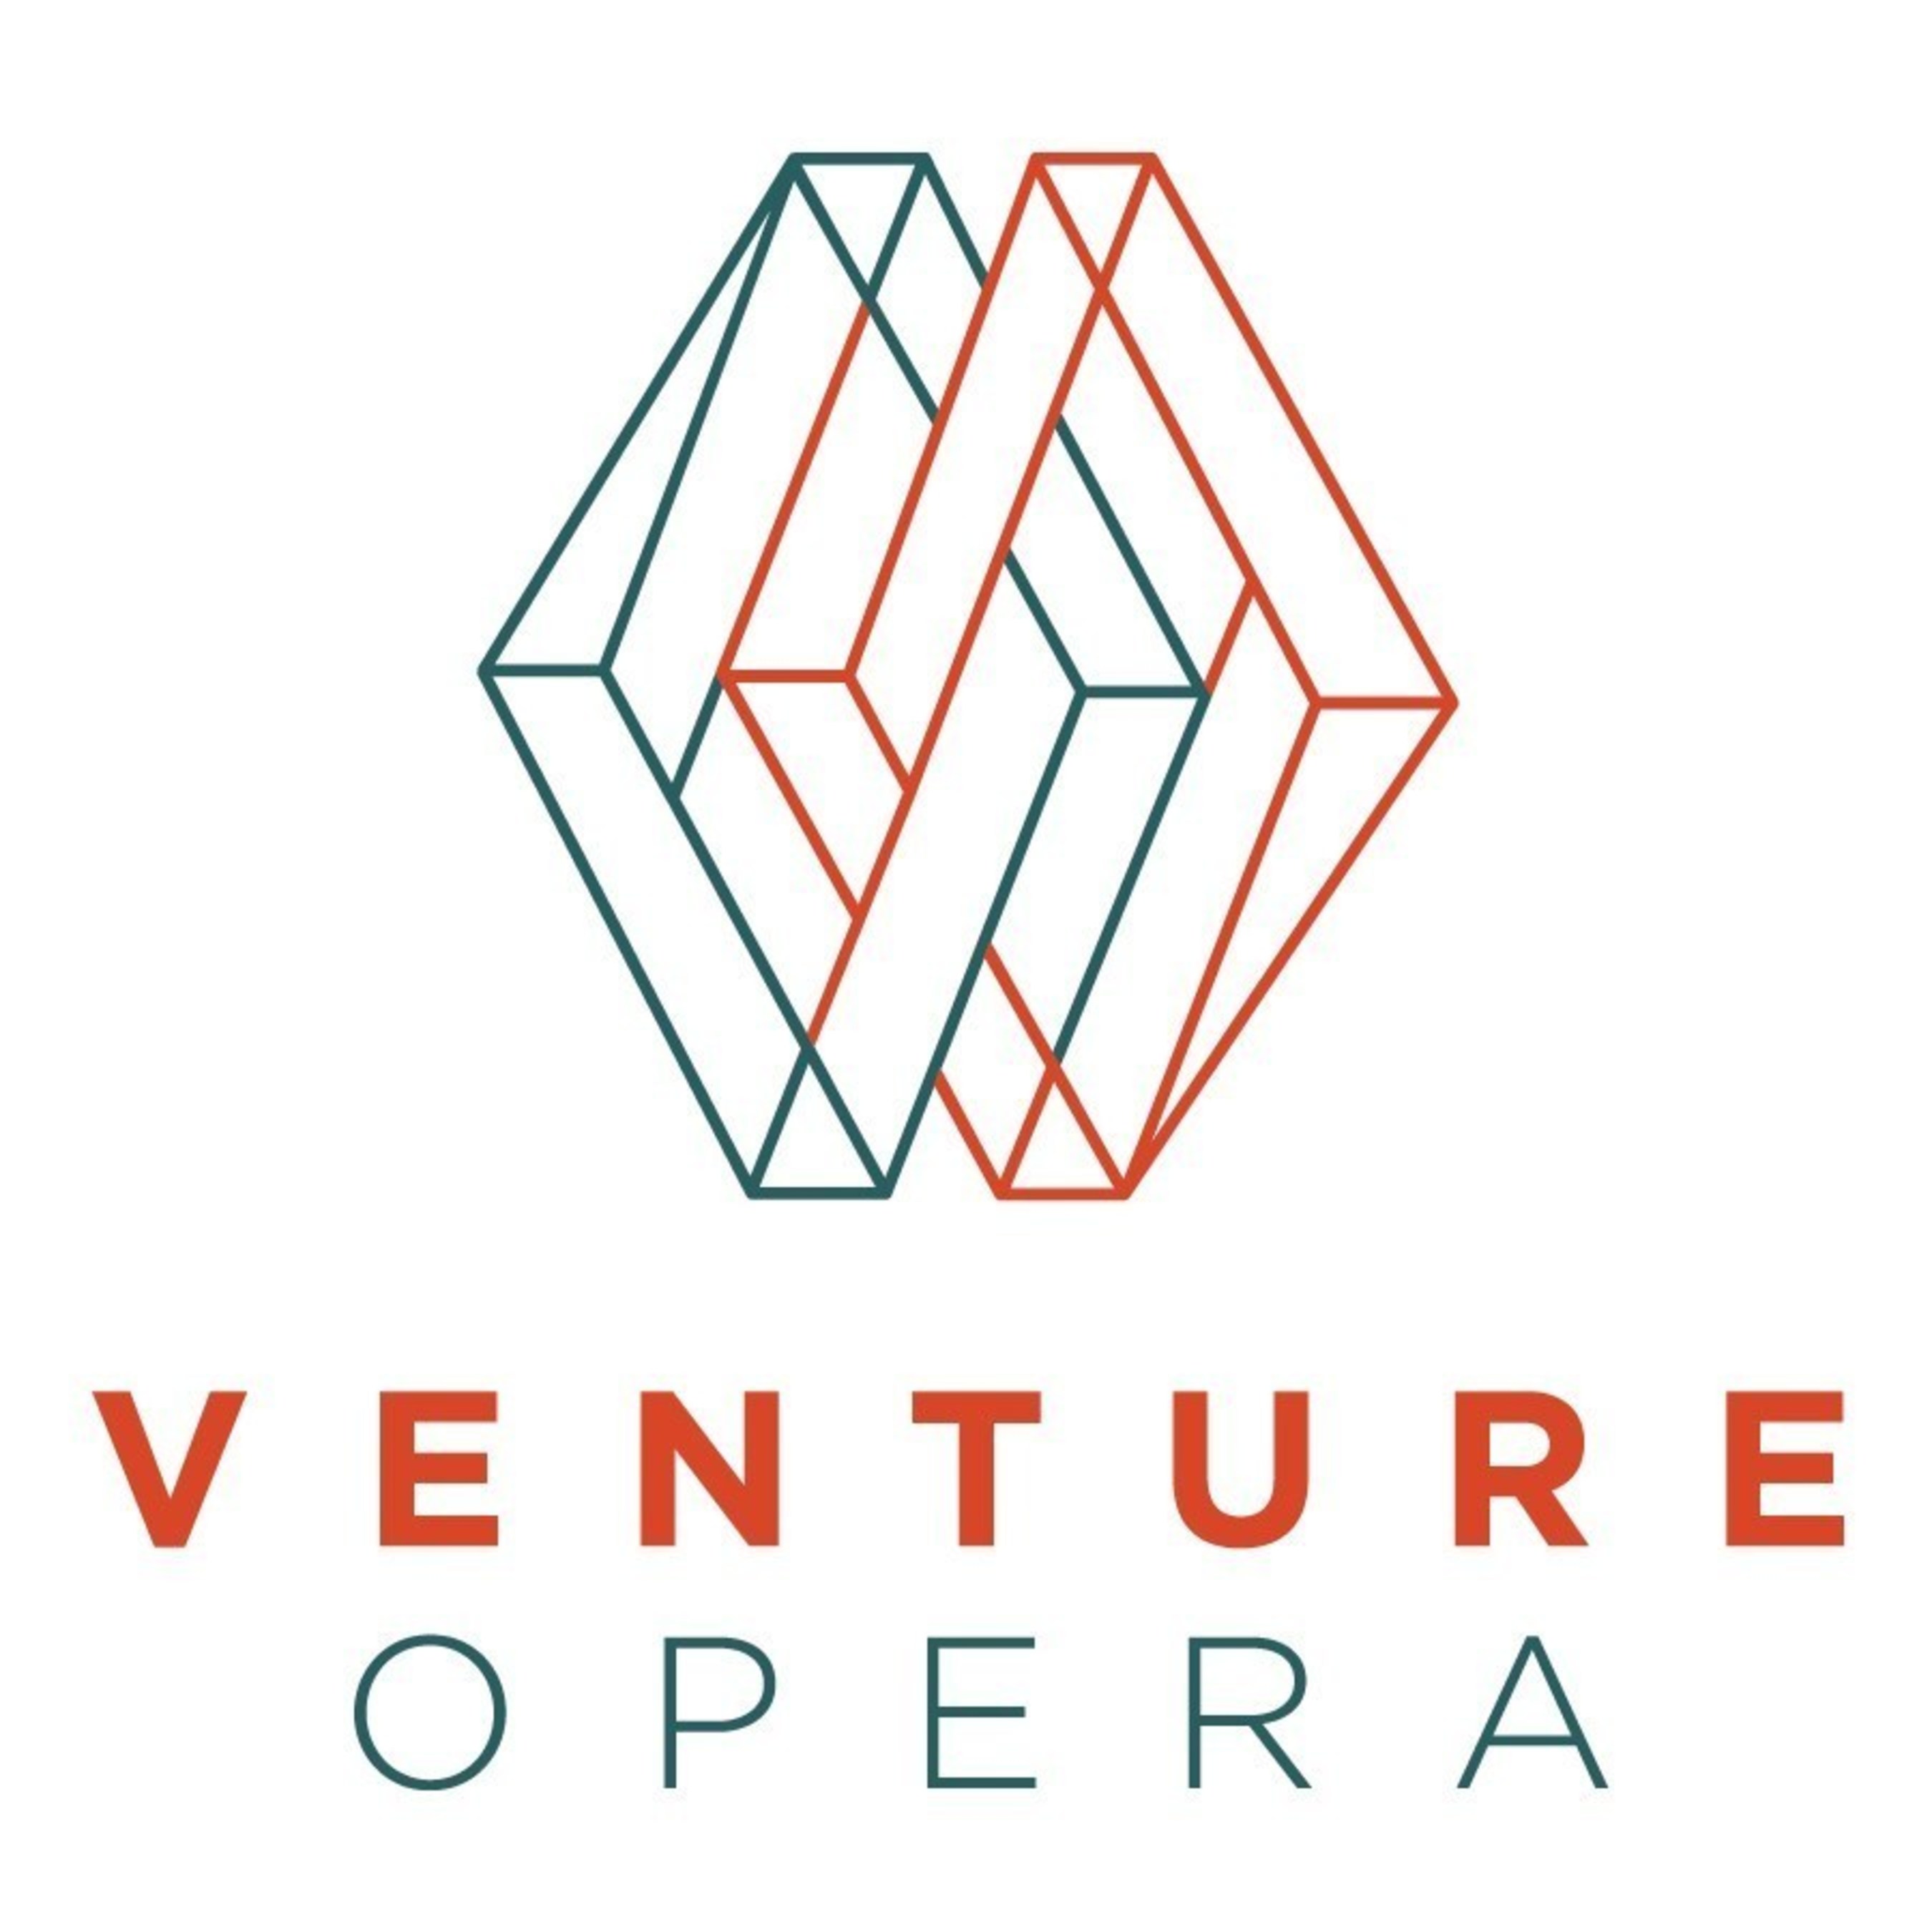 Venture Opera - A New Opera Company in NYC producing thematic events out of classical repertoire